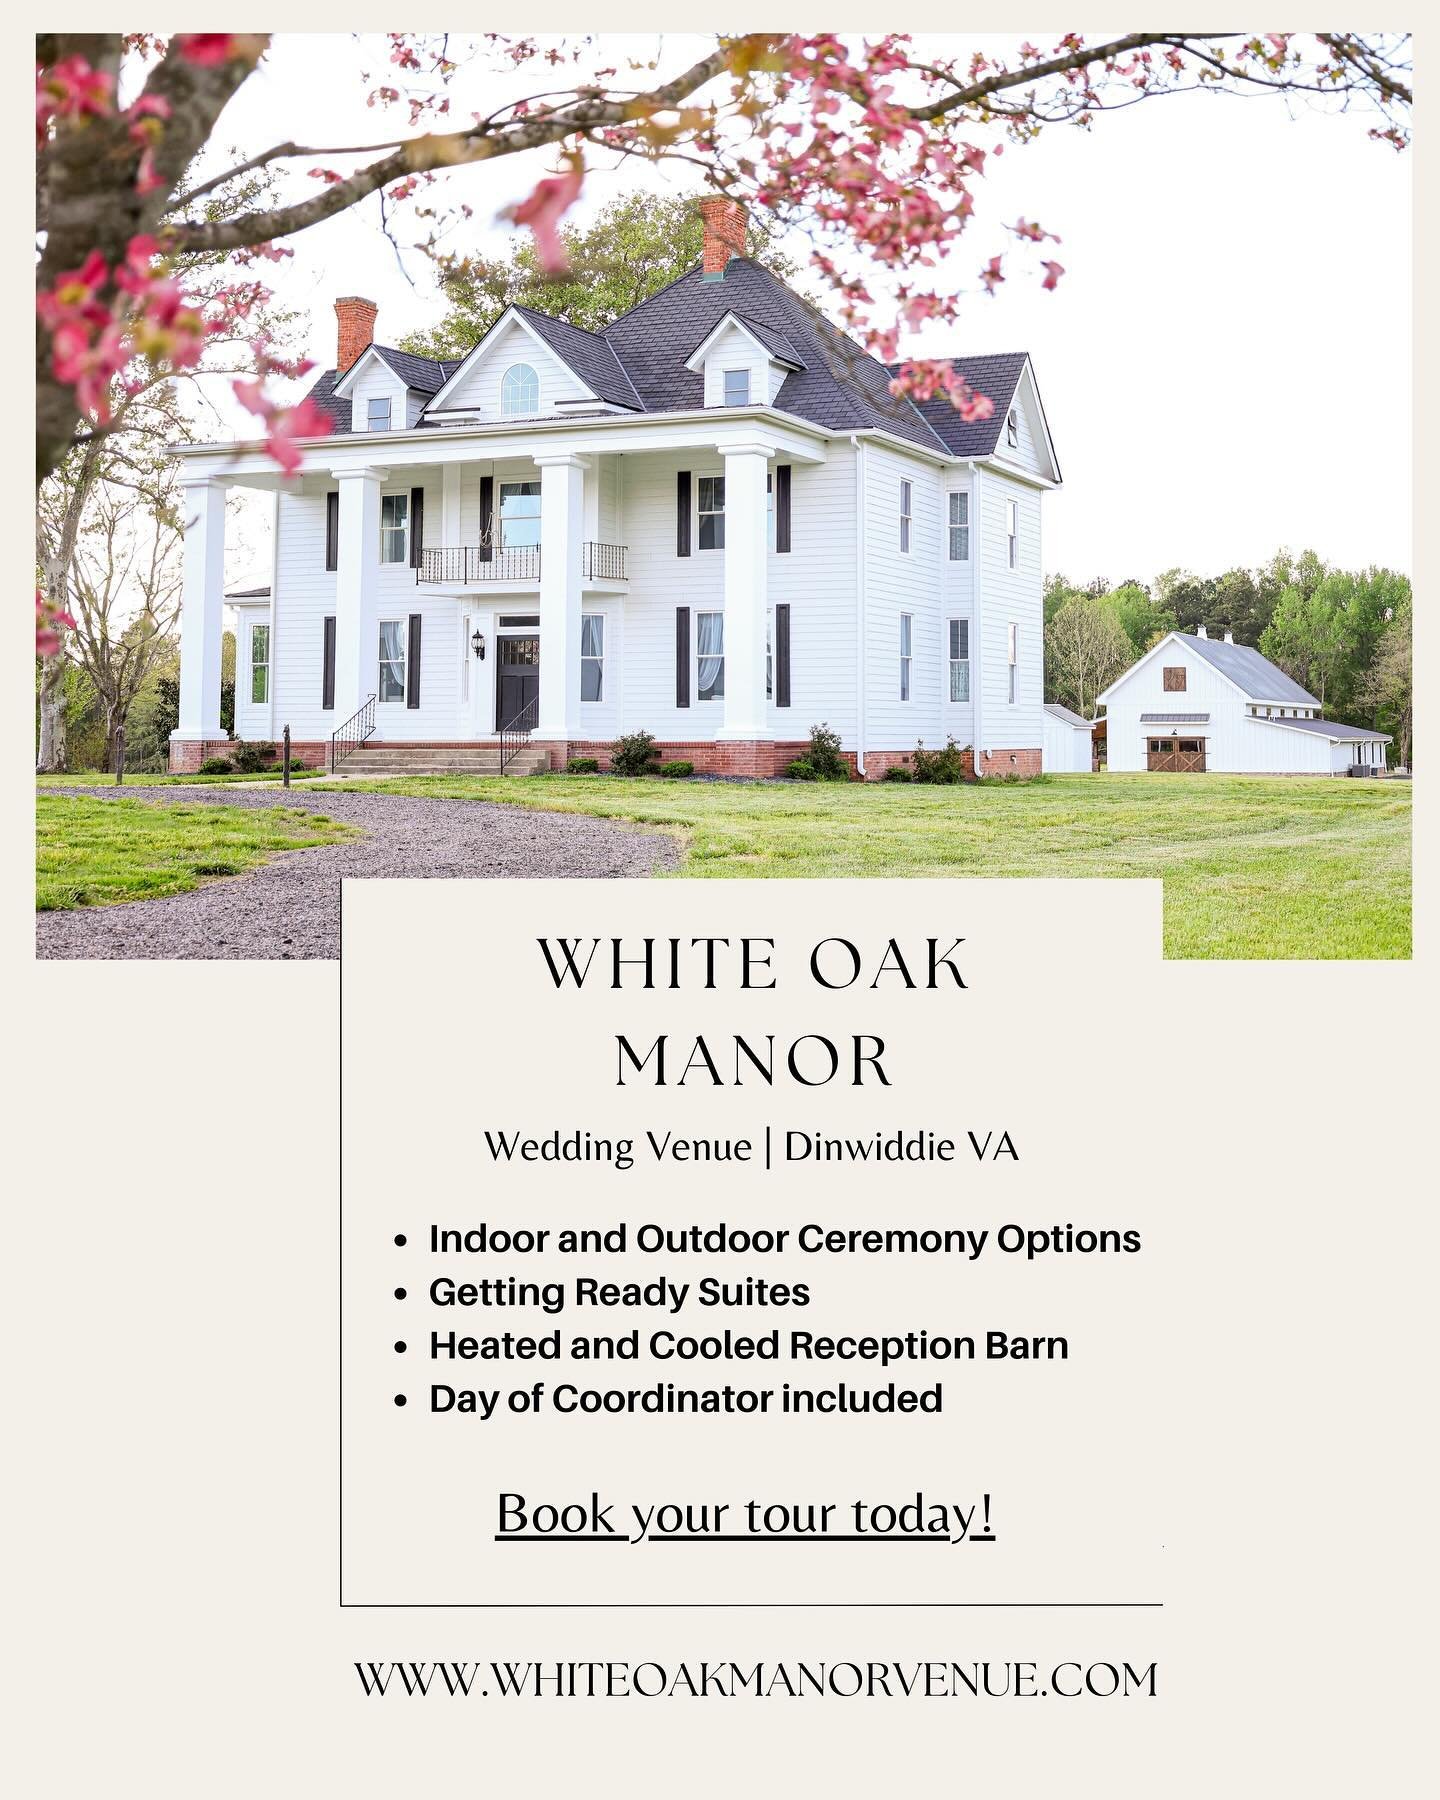 We are loving this spring weather and it is the perfect time to come tour our beautiful venue! 
Book your tour today at www.whiteoakmanorvenue.com 

#whiteoakmanorweddings #virginiaweddingvenue #chapelvenue #barnvenue #virginiaweddings #outdoorweddin